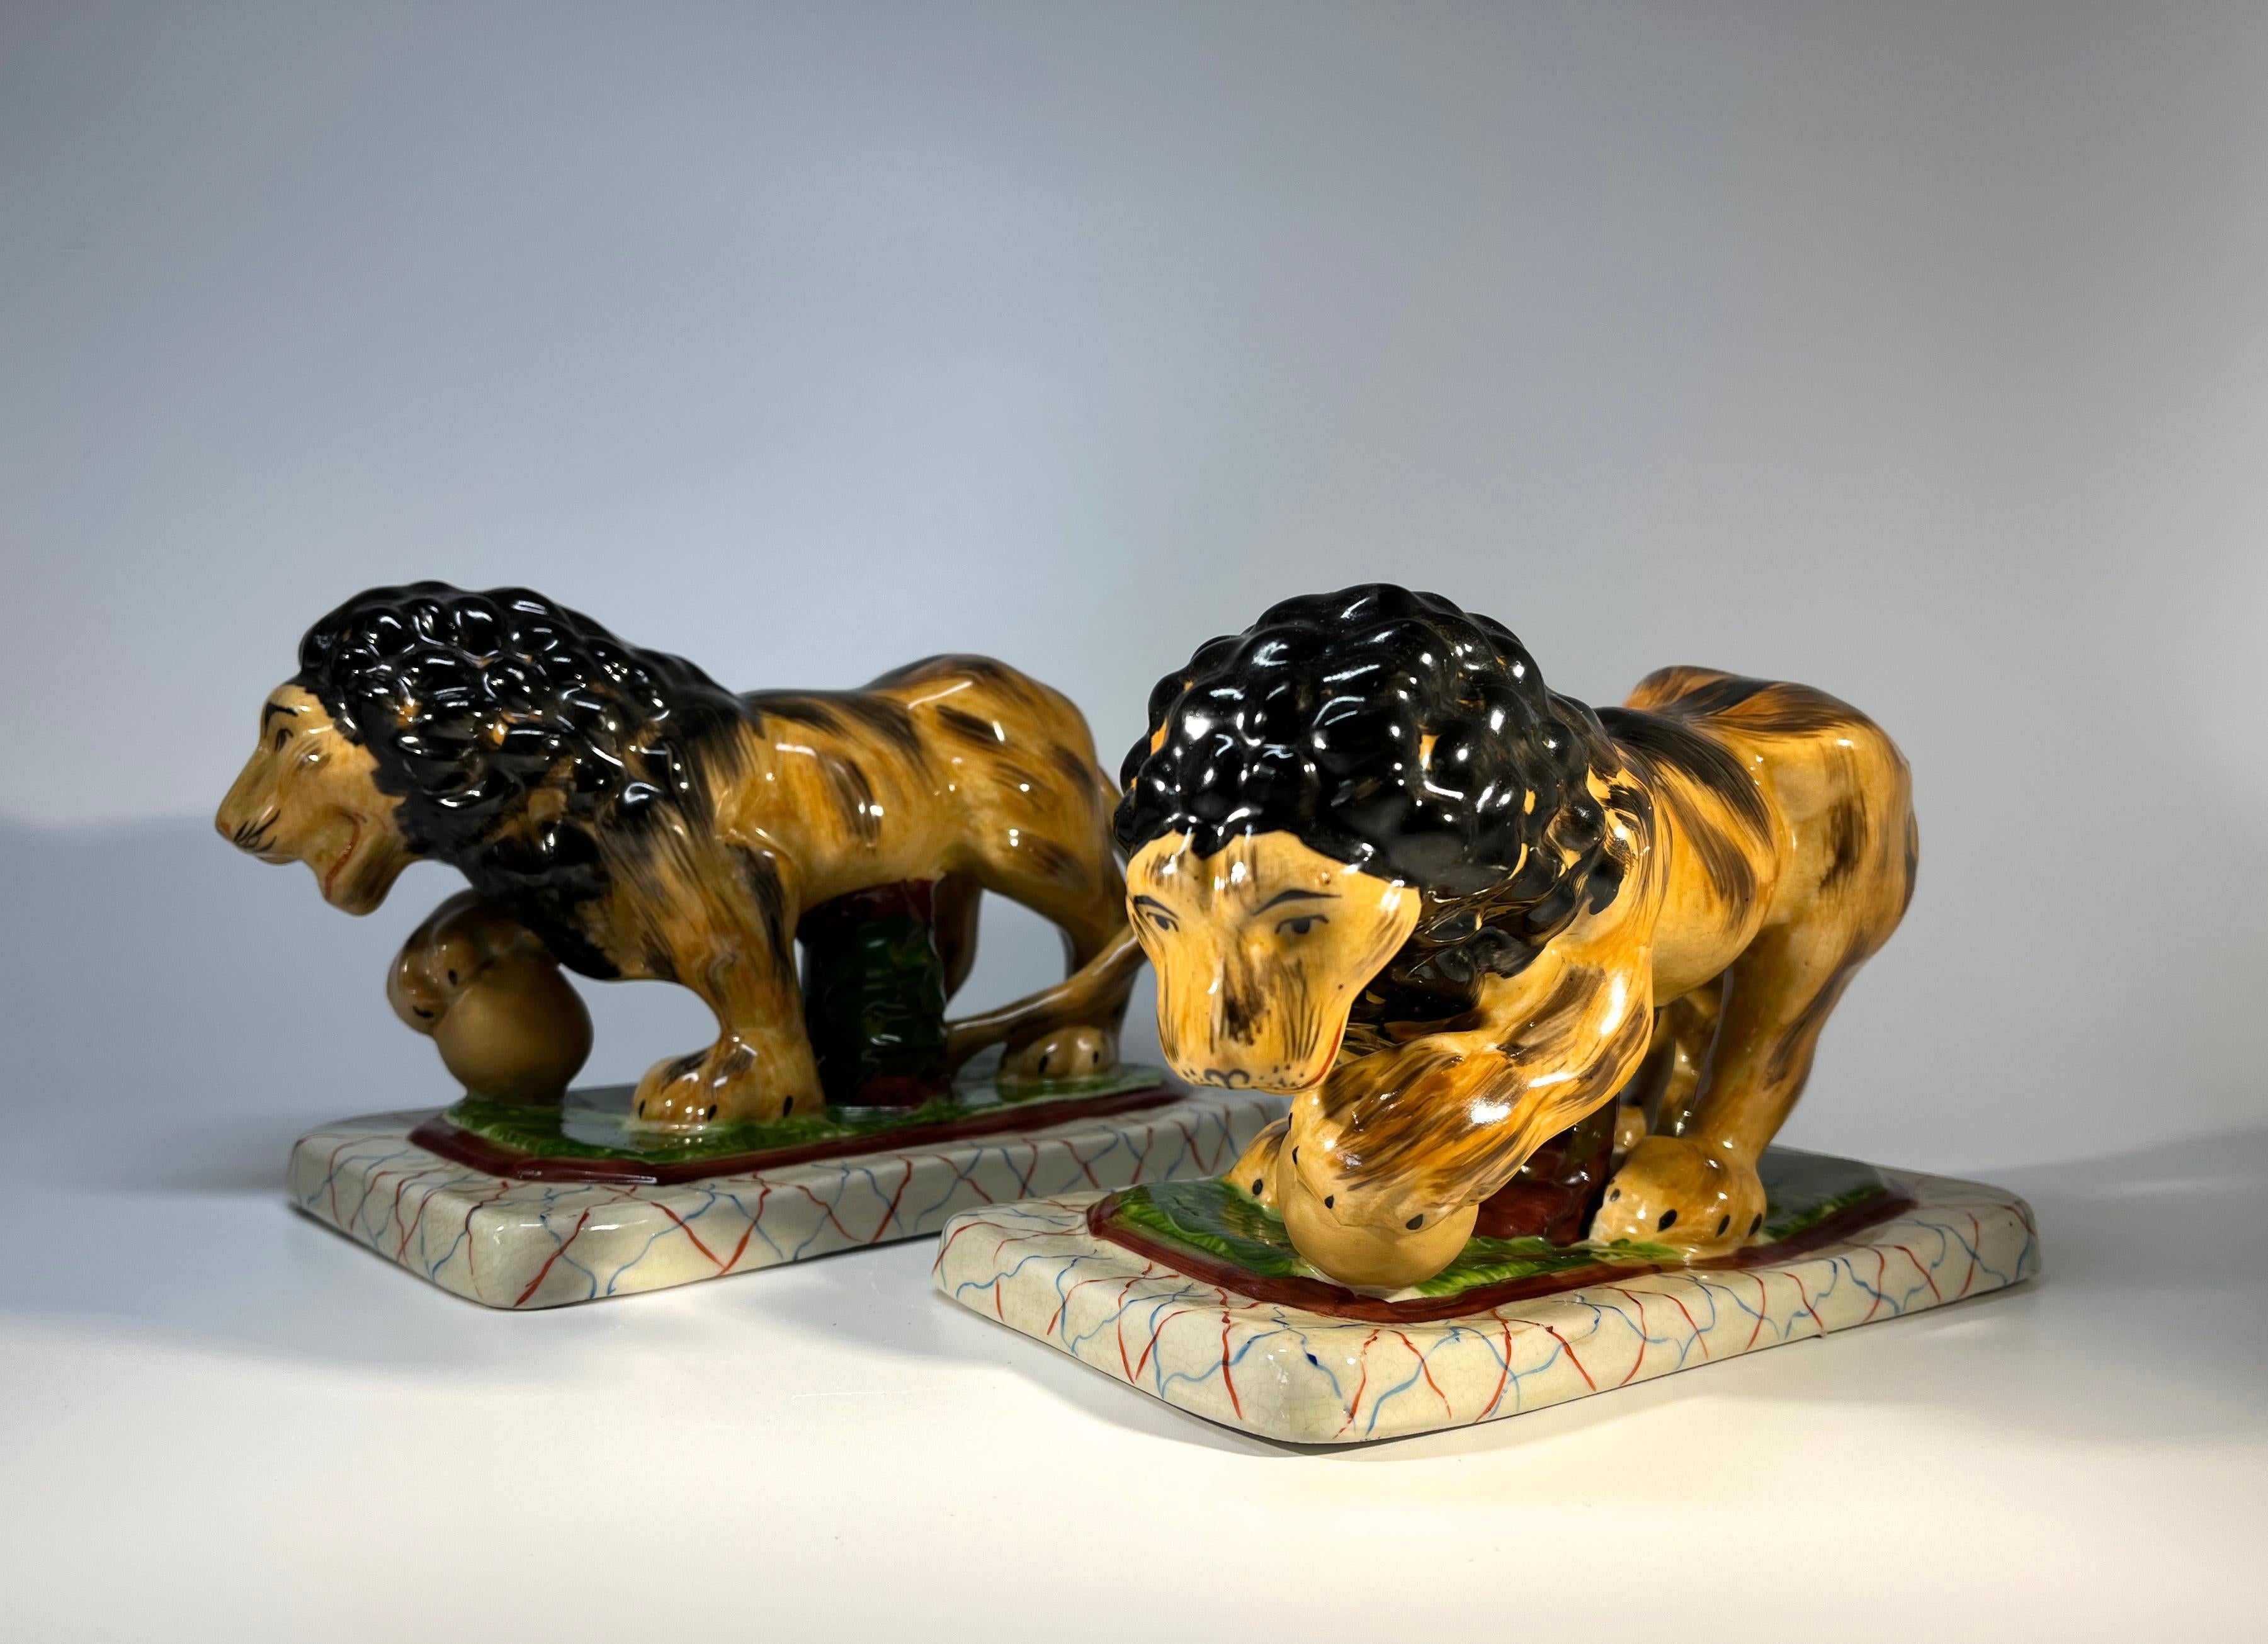 Ceramic Pair Of Impressive Medici Lions In Staffordshire Pottery Antique Style For Sale